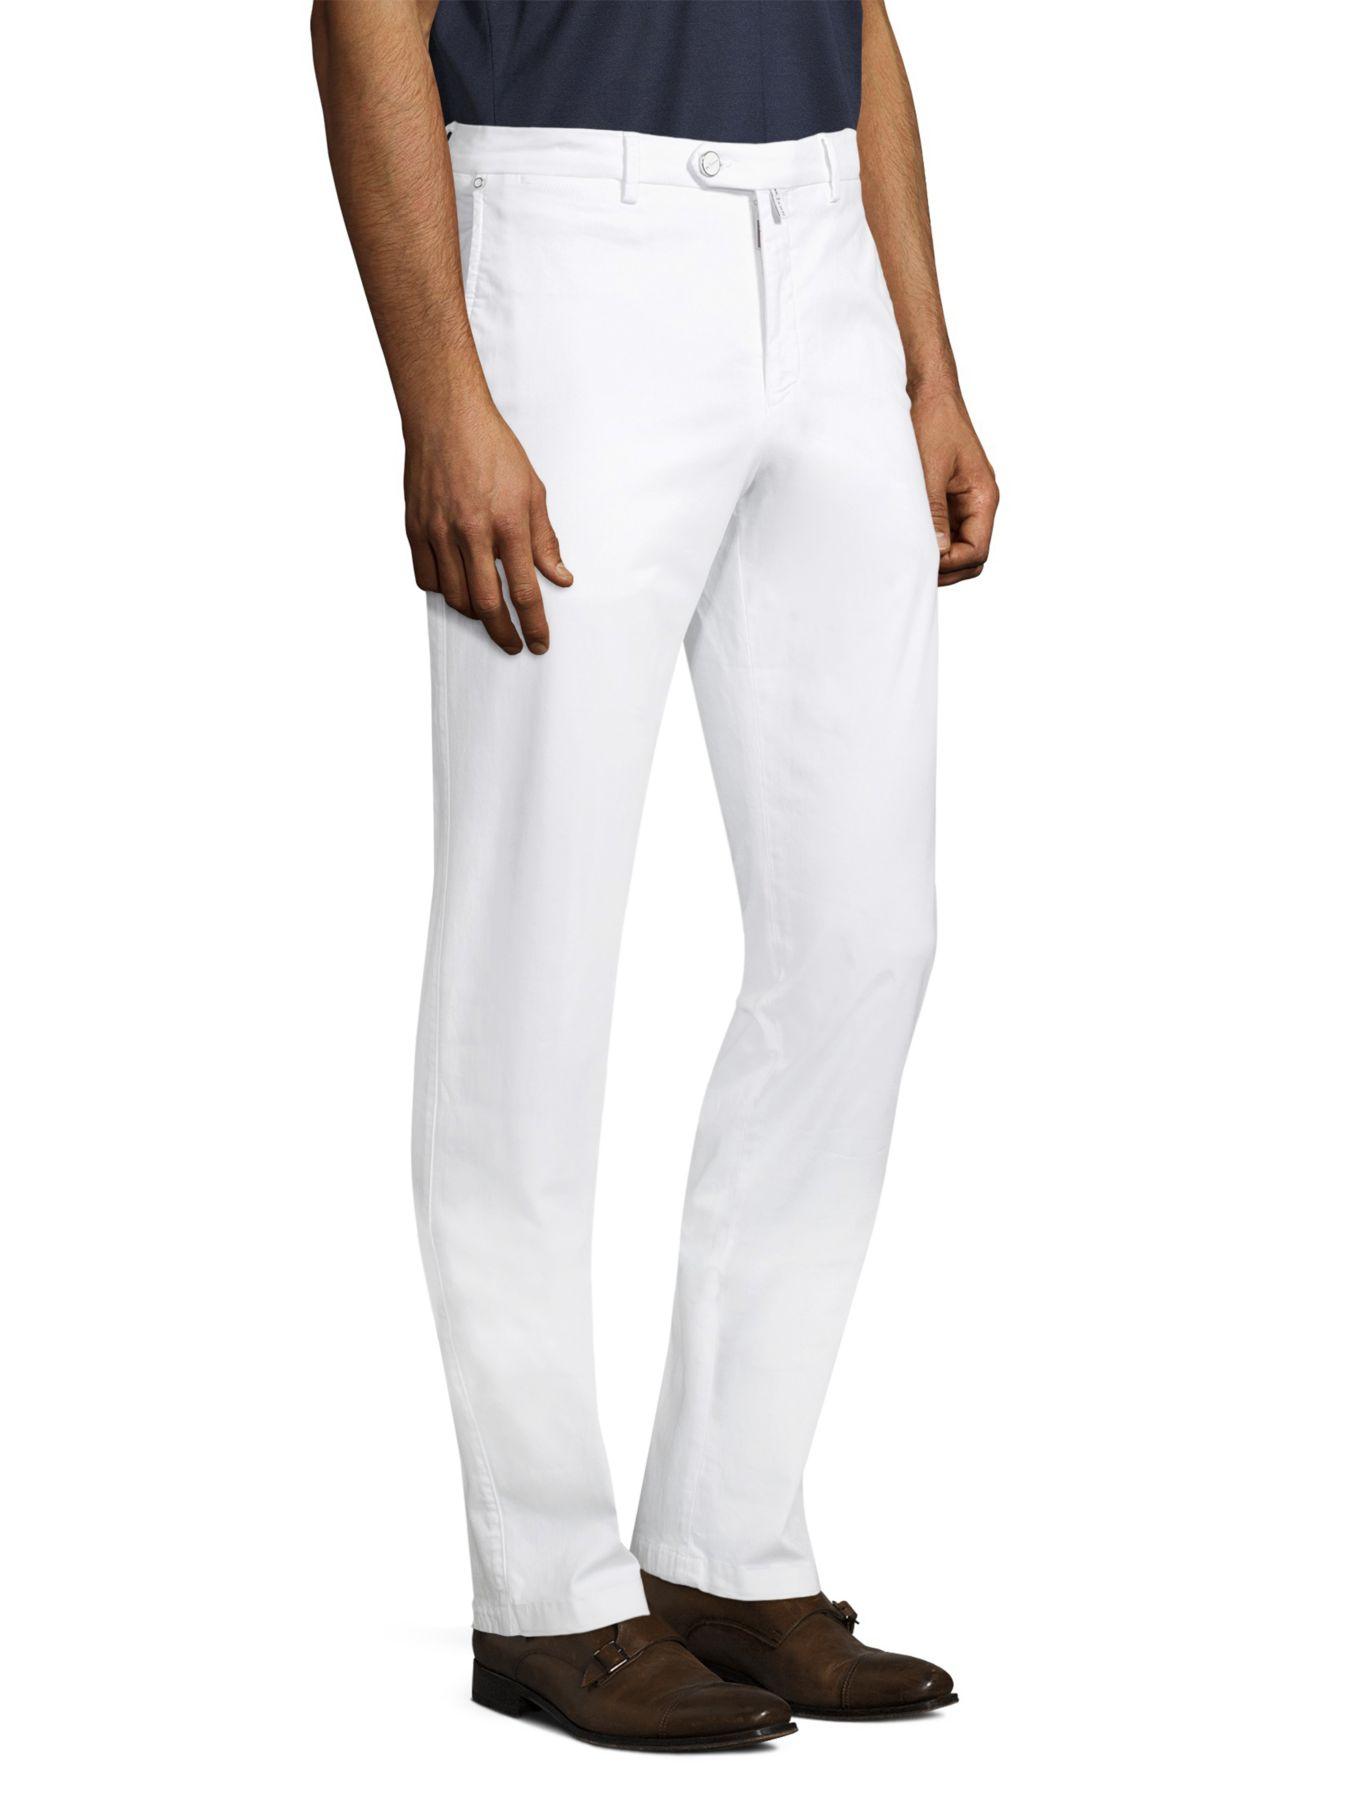 Kiton Cotton Straight-leg Stretch Pants in White for Men - Save 25% - Lyst